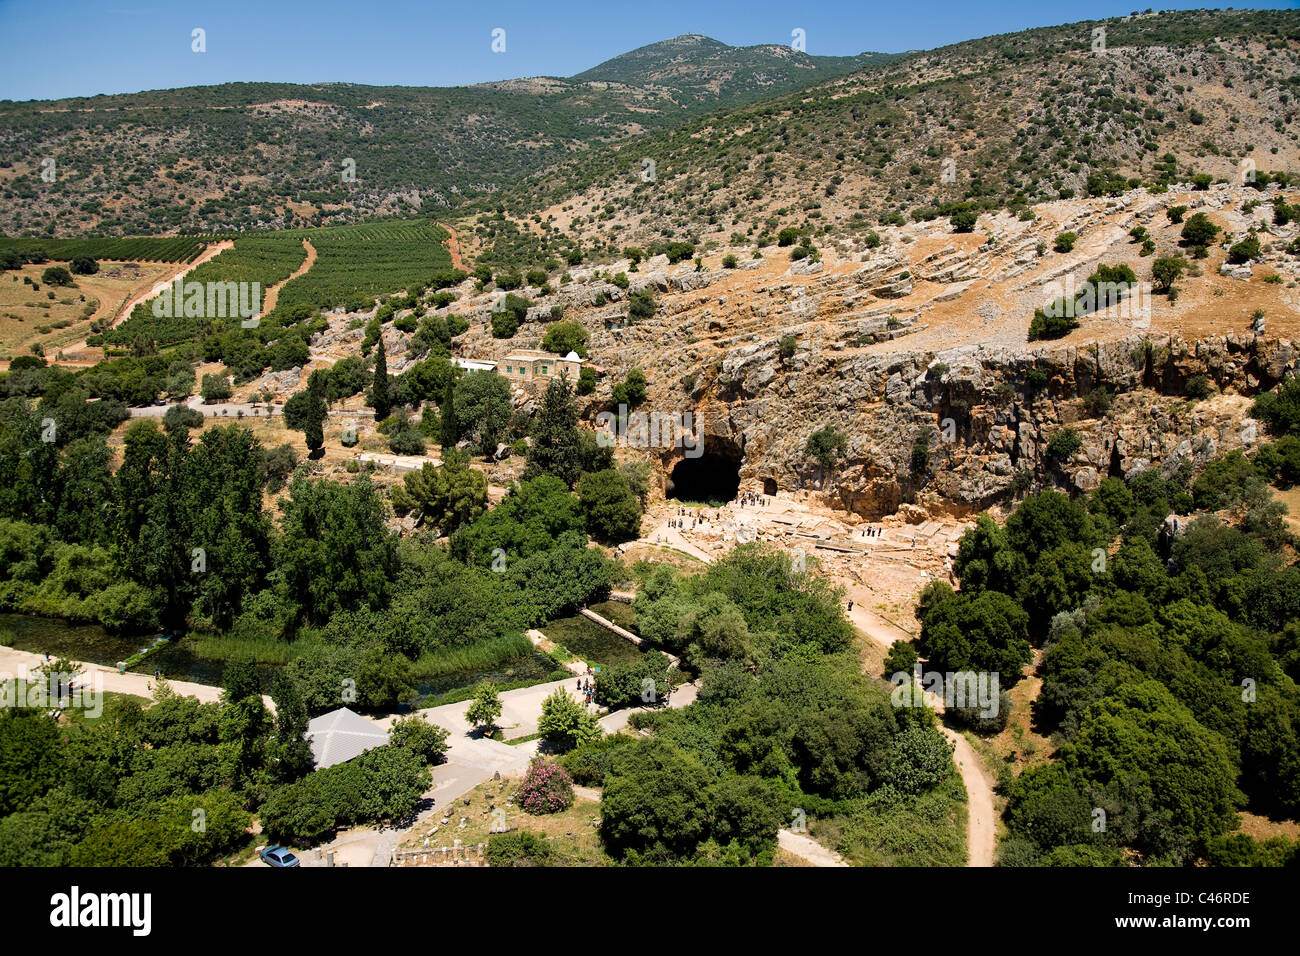 Aerial photograph of the ruins of Banias in the Northern Golan Heights Stock Photo